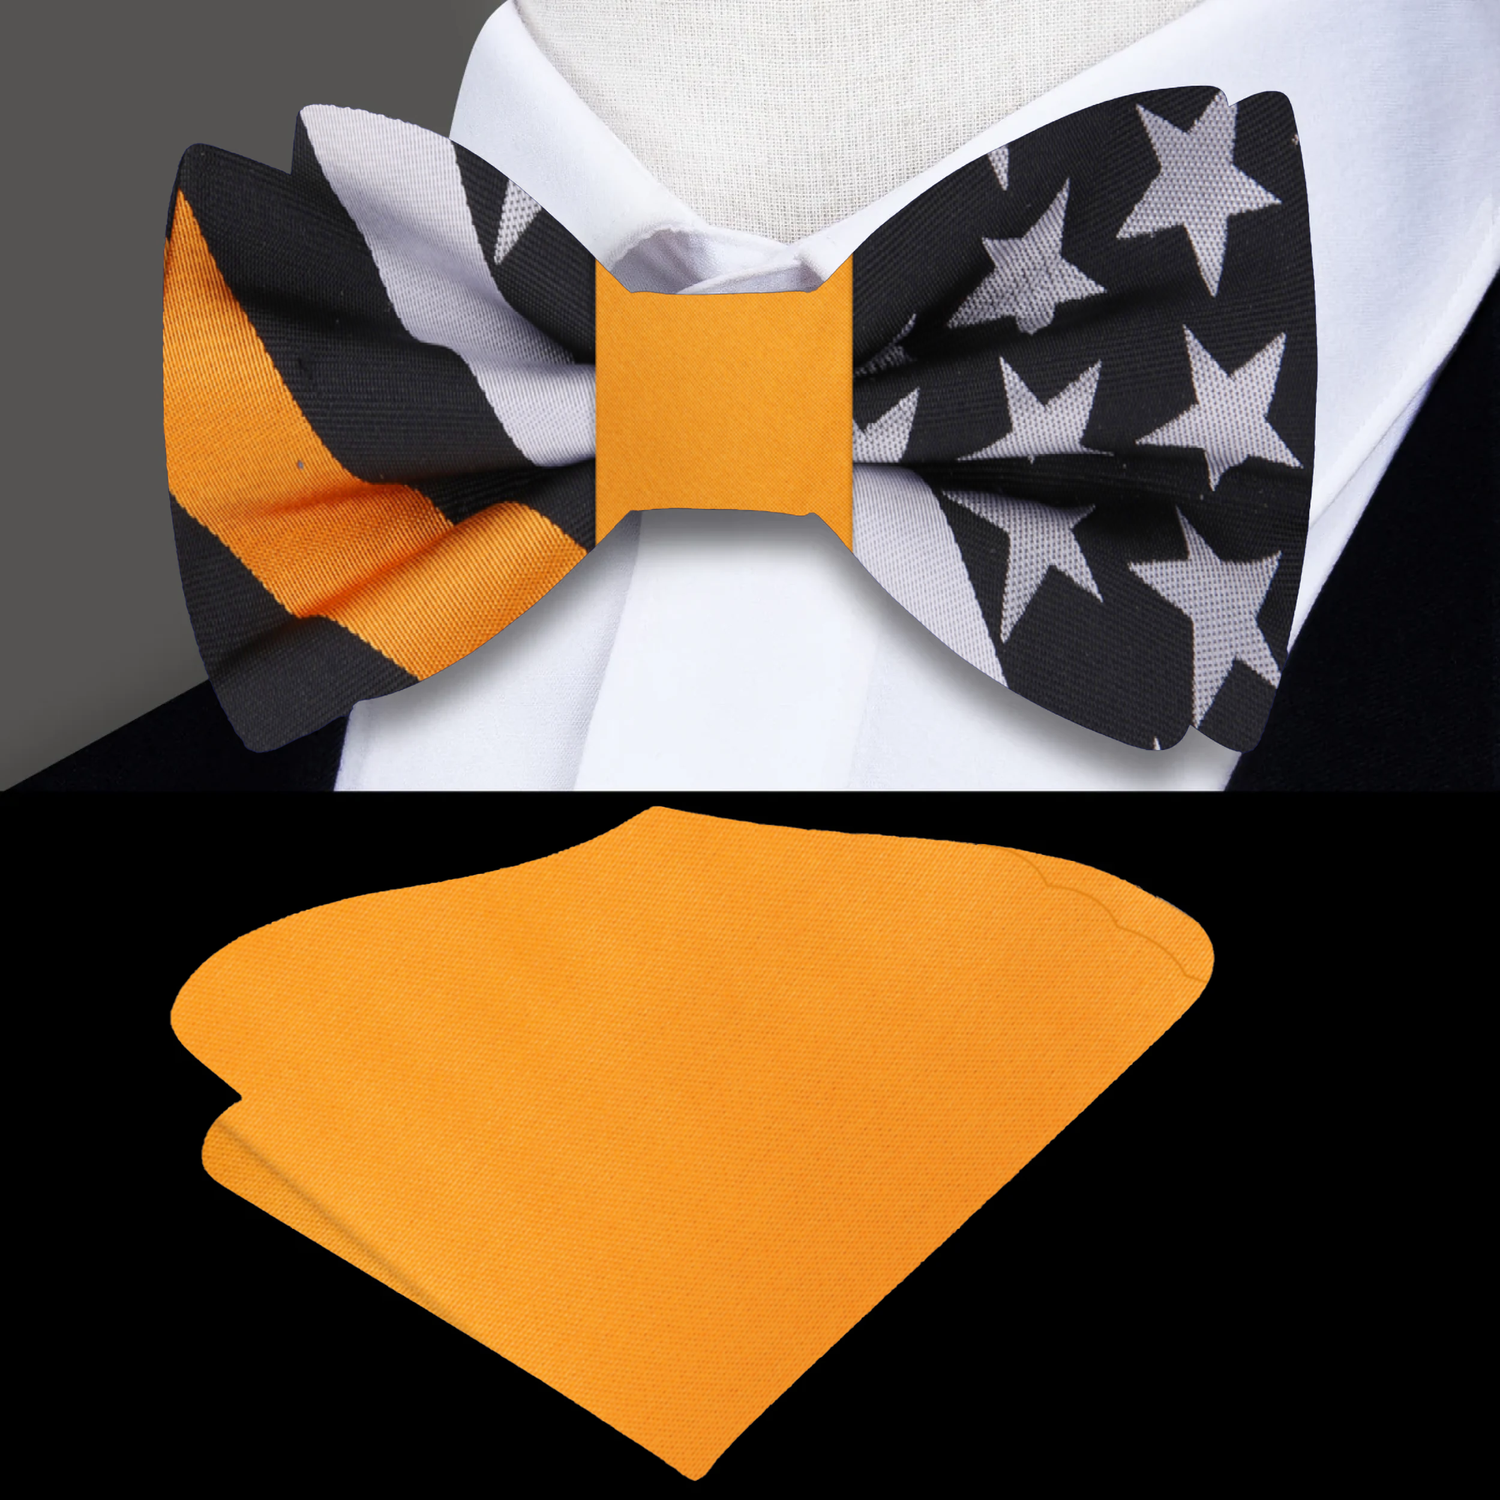 Main: Black, Grey, Yellow Flag Pattern Bow Tie and Yellow Pocket Square